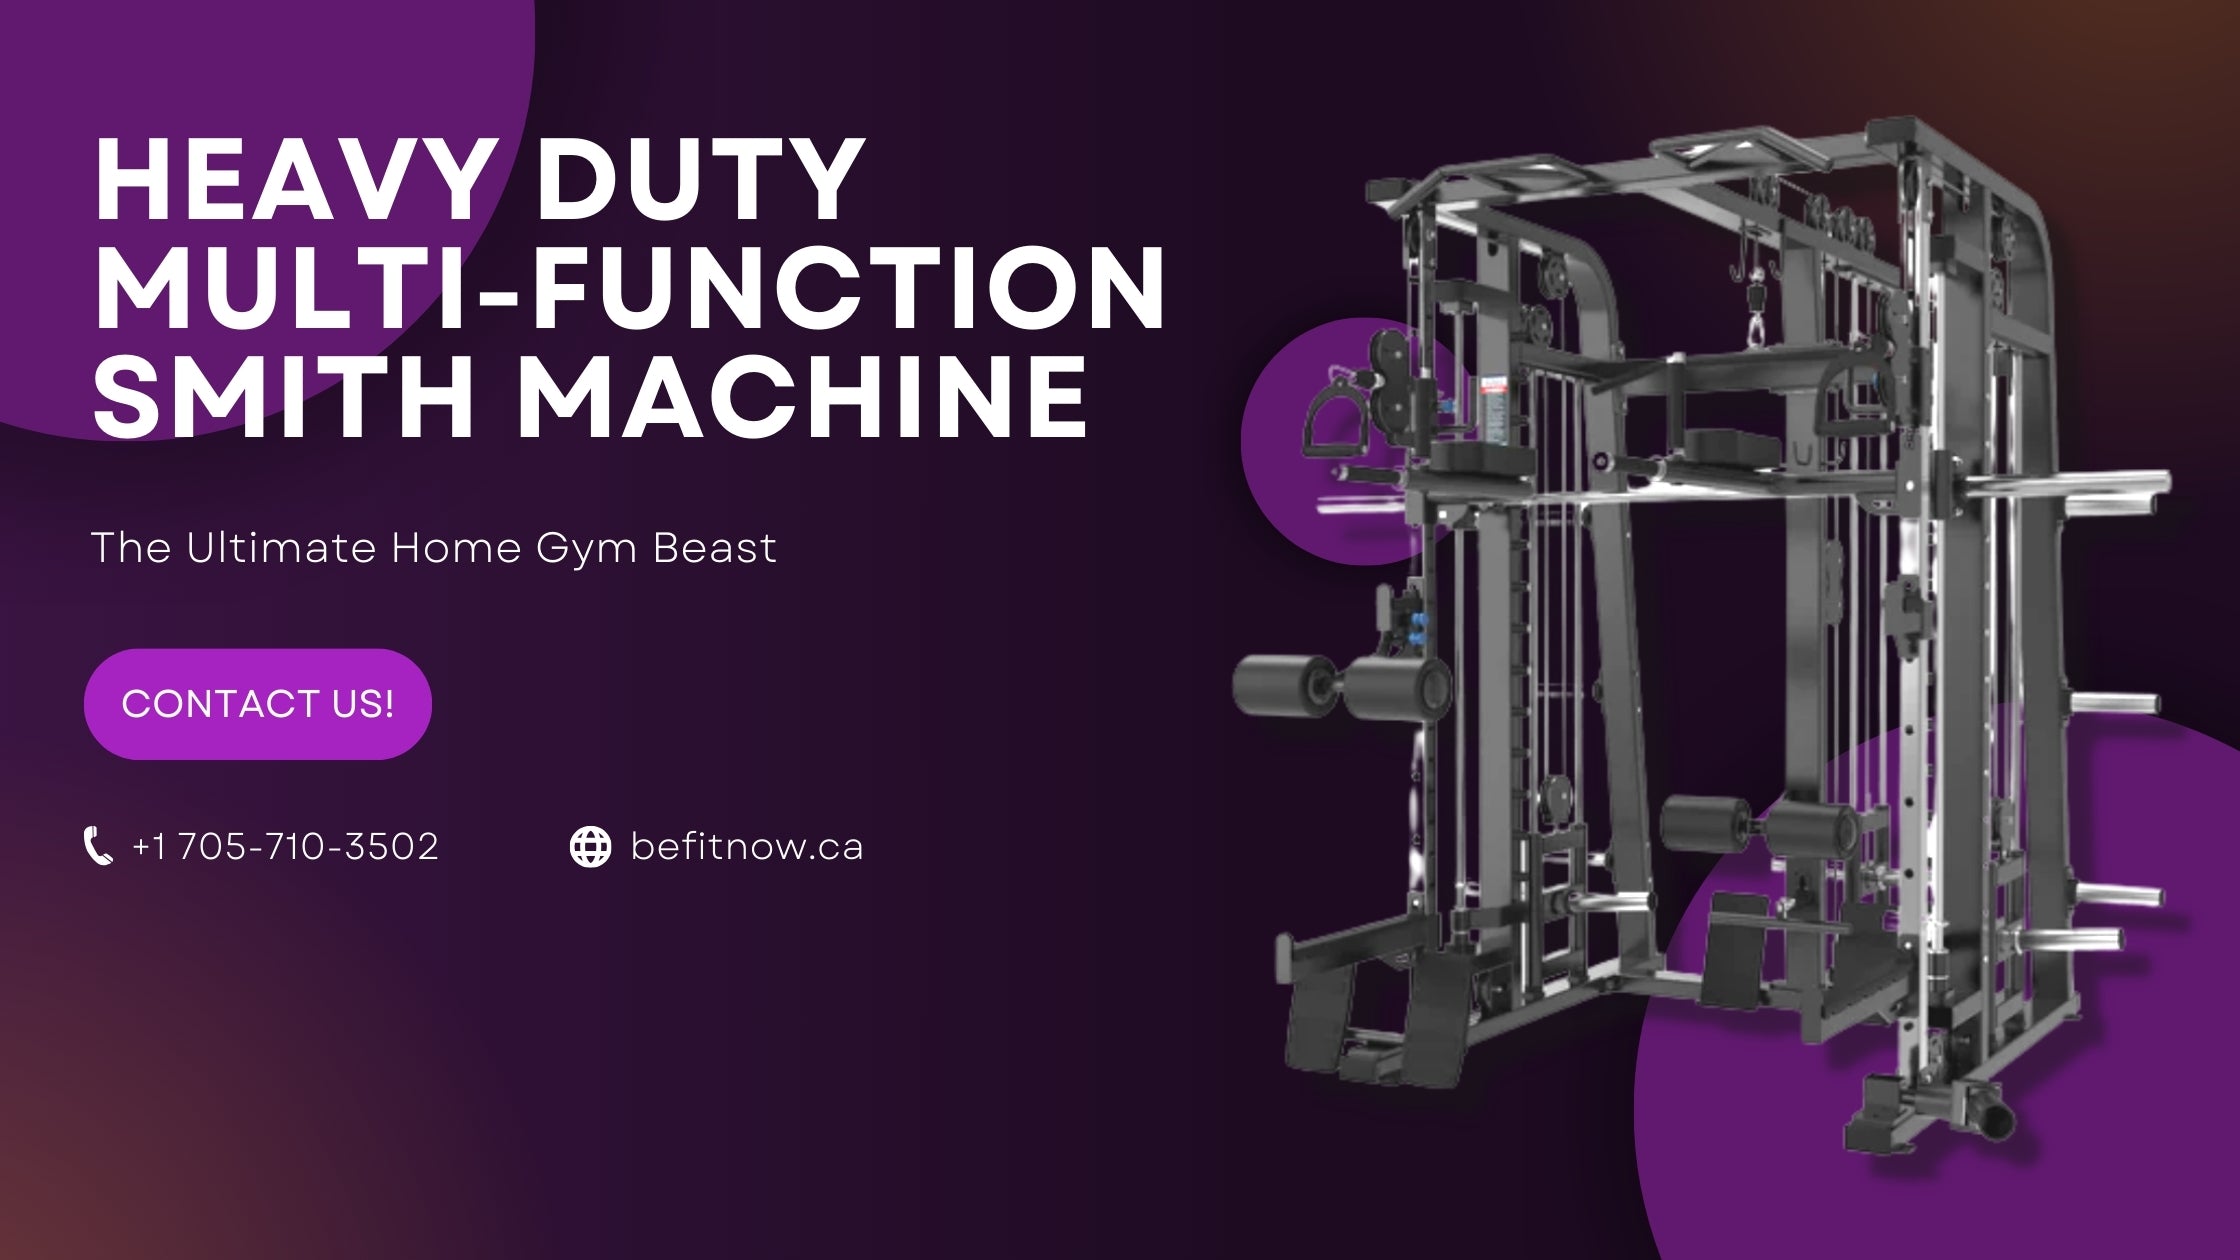 Heavy Duty Multi-Function Smith Machine | The Ultimate Home Gym Beast